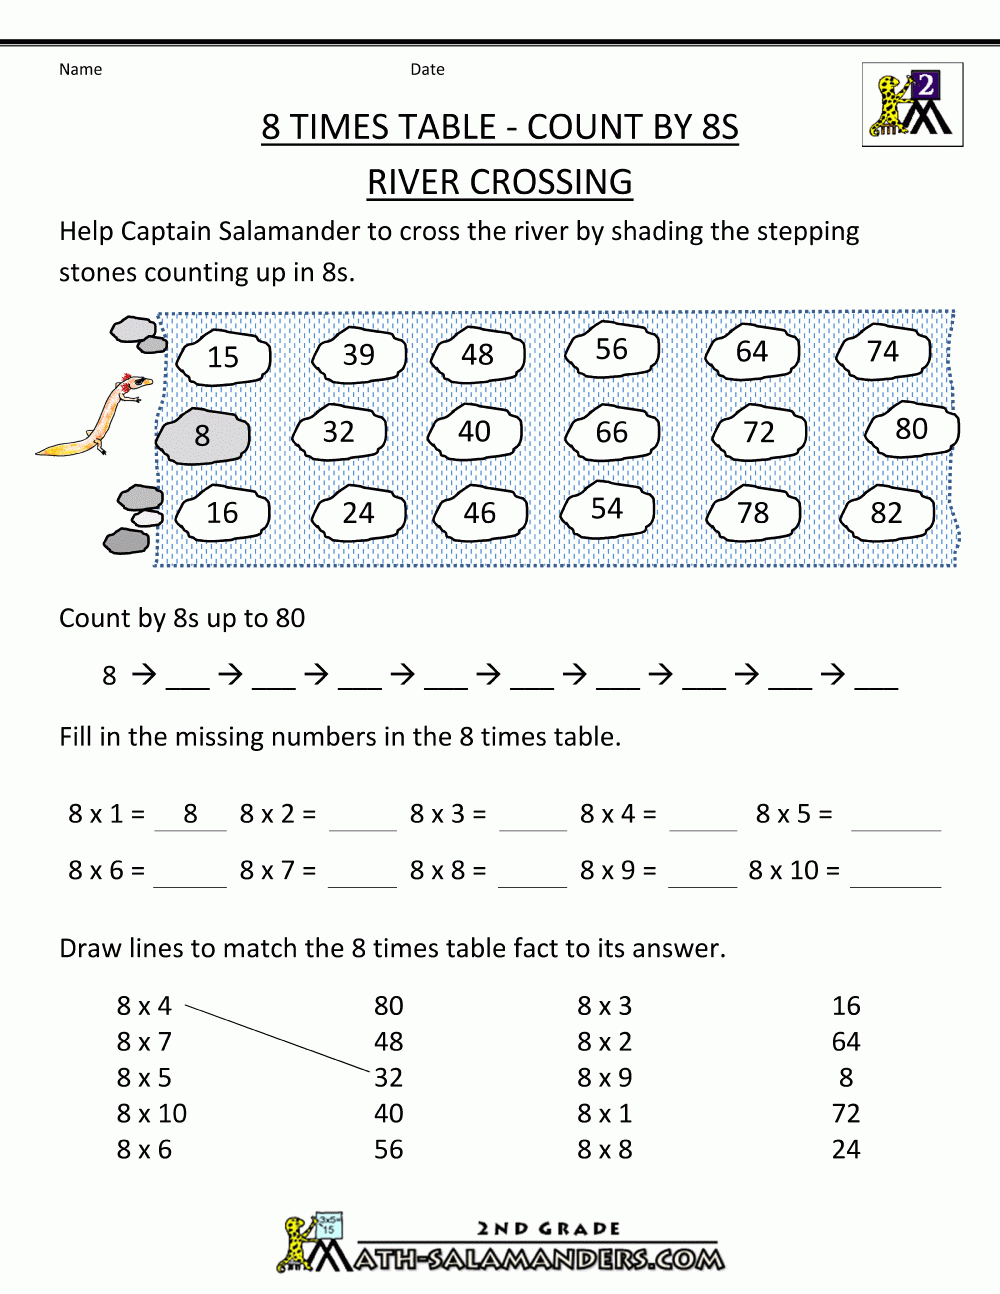 8 Times Table intended for Multiplication Worksheets 8 Tables